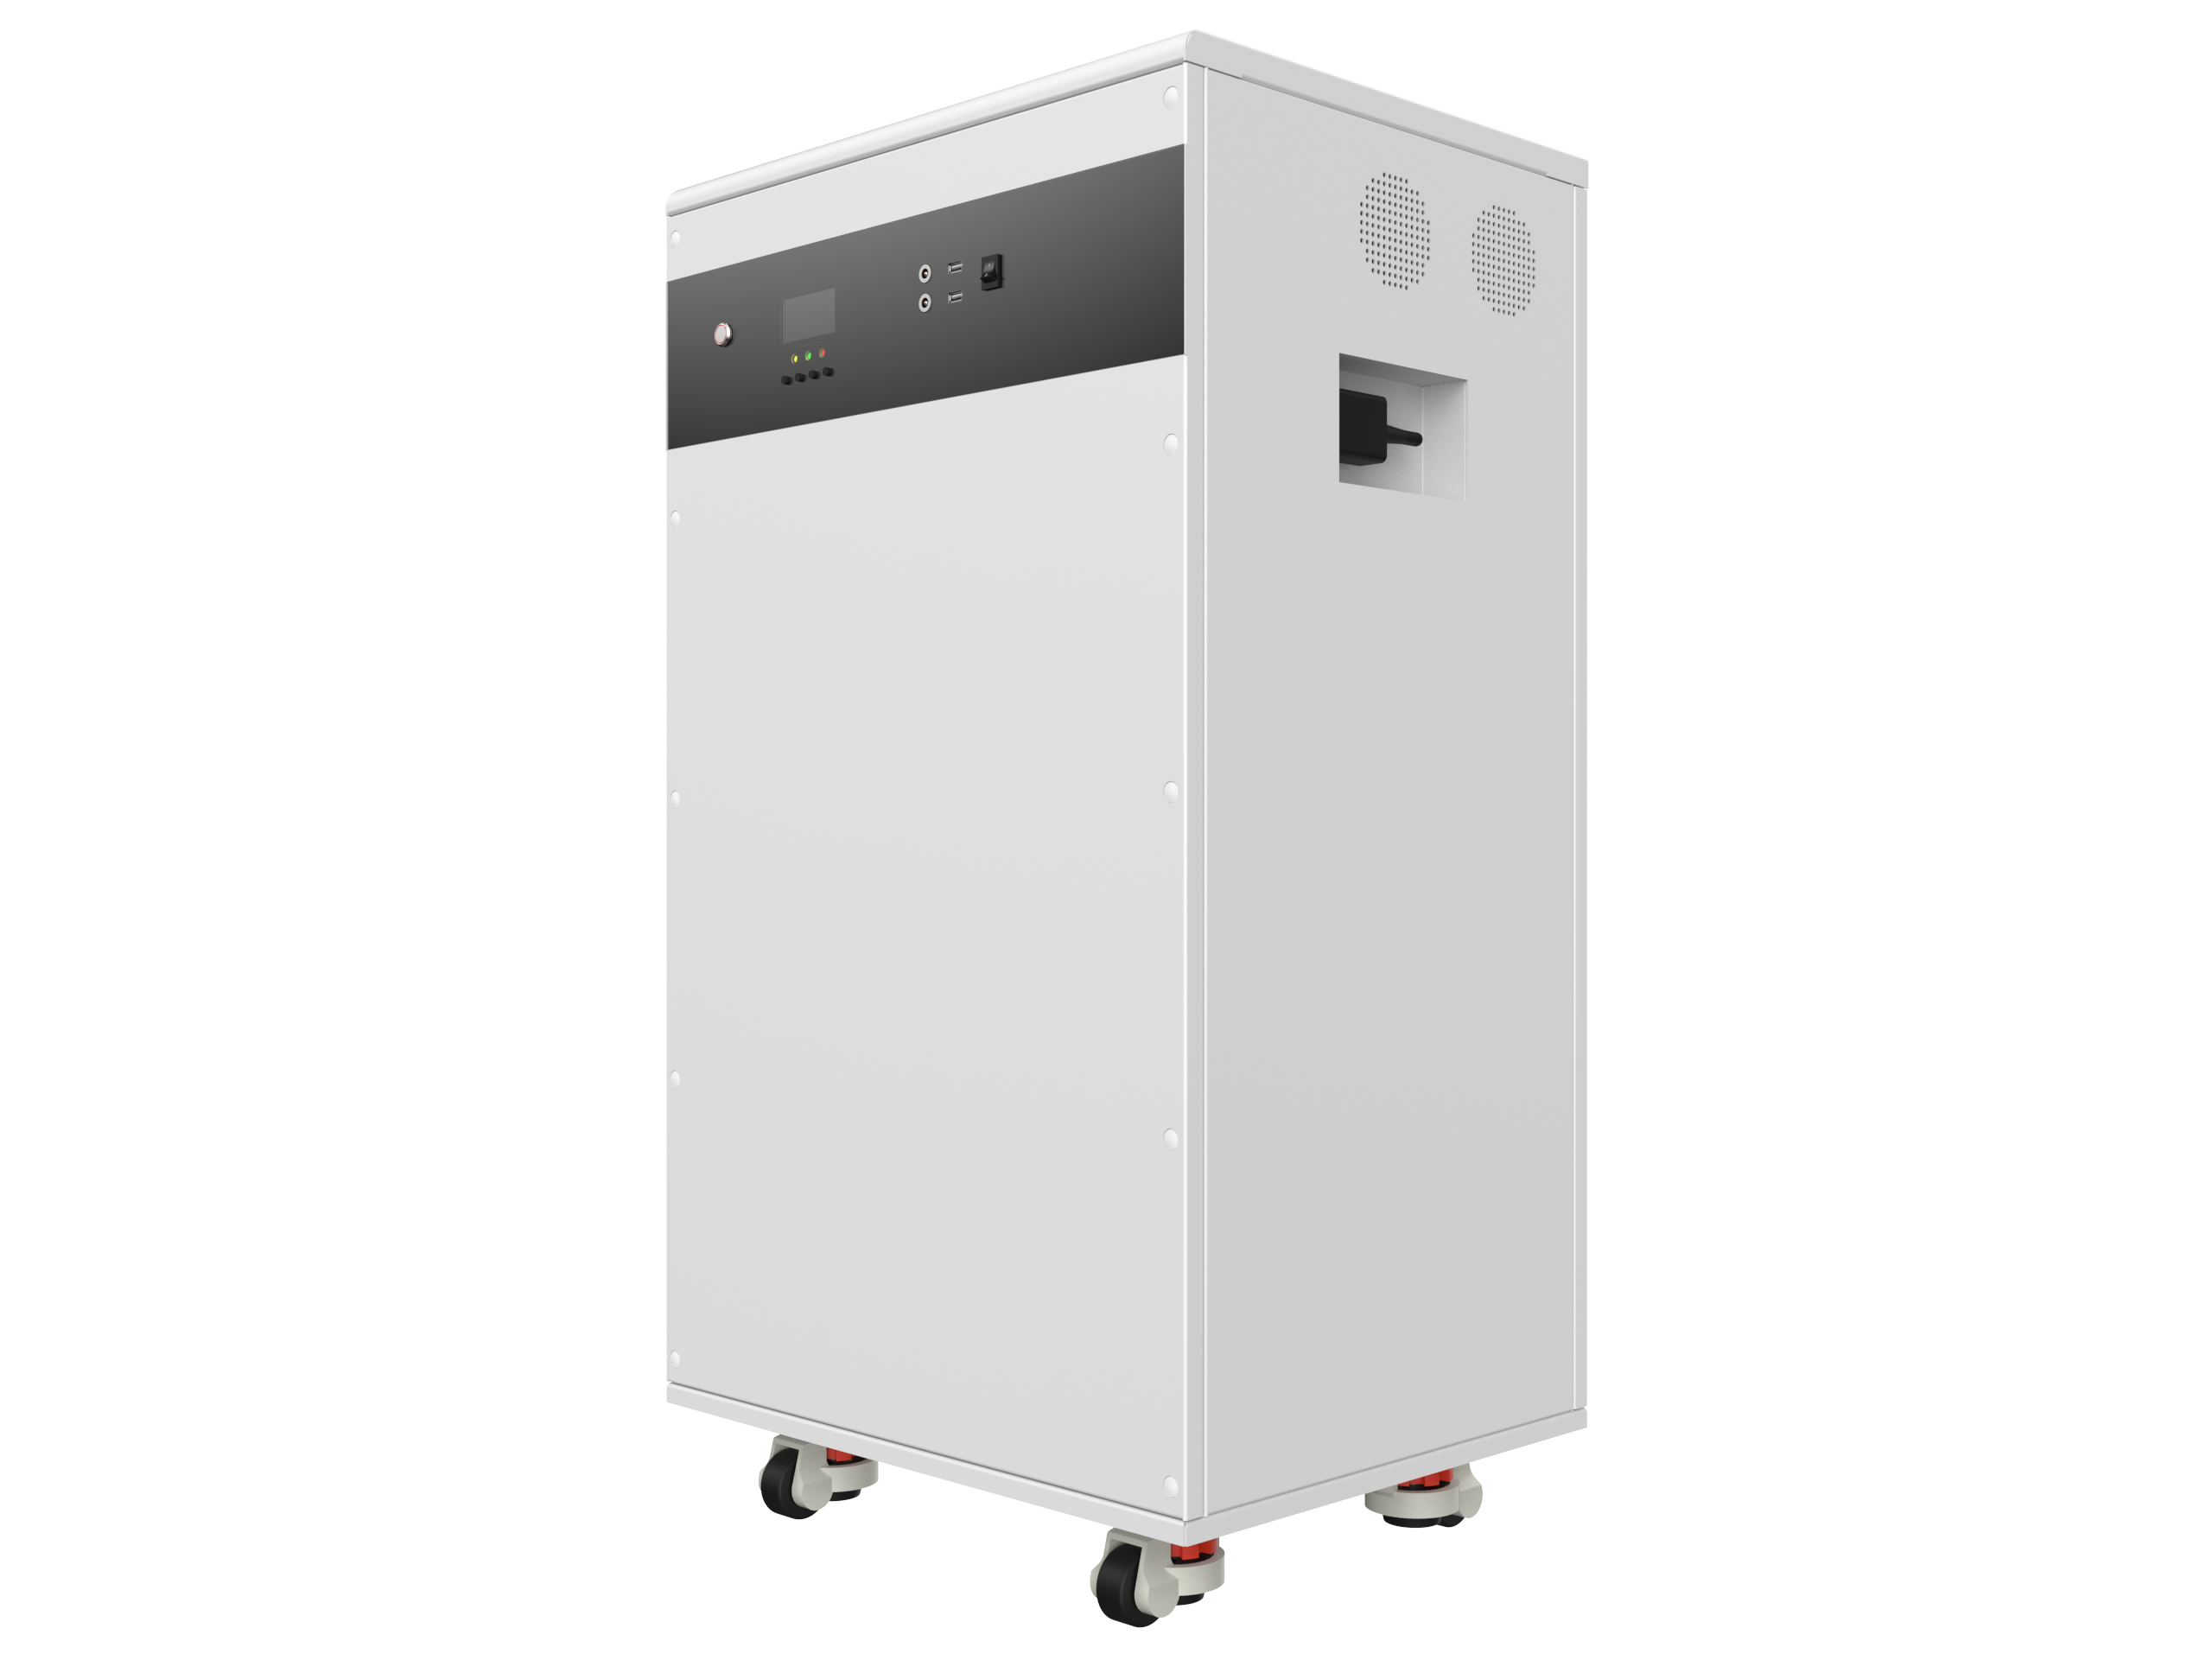 Off-Grid All-In-One Energy Storage System